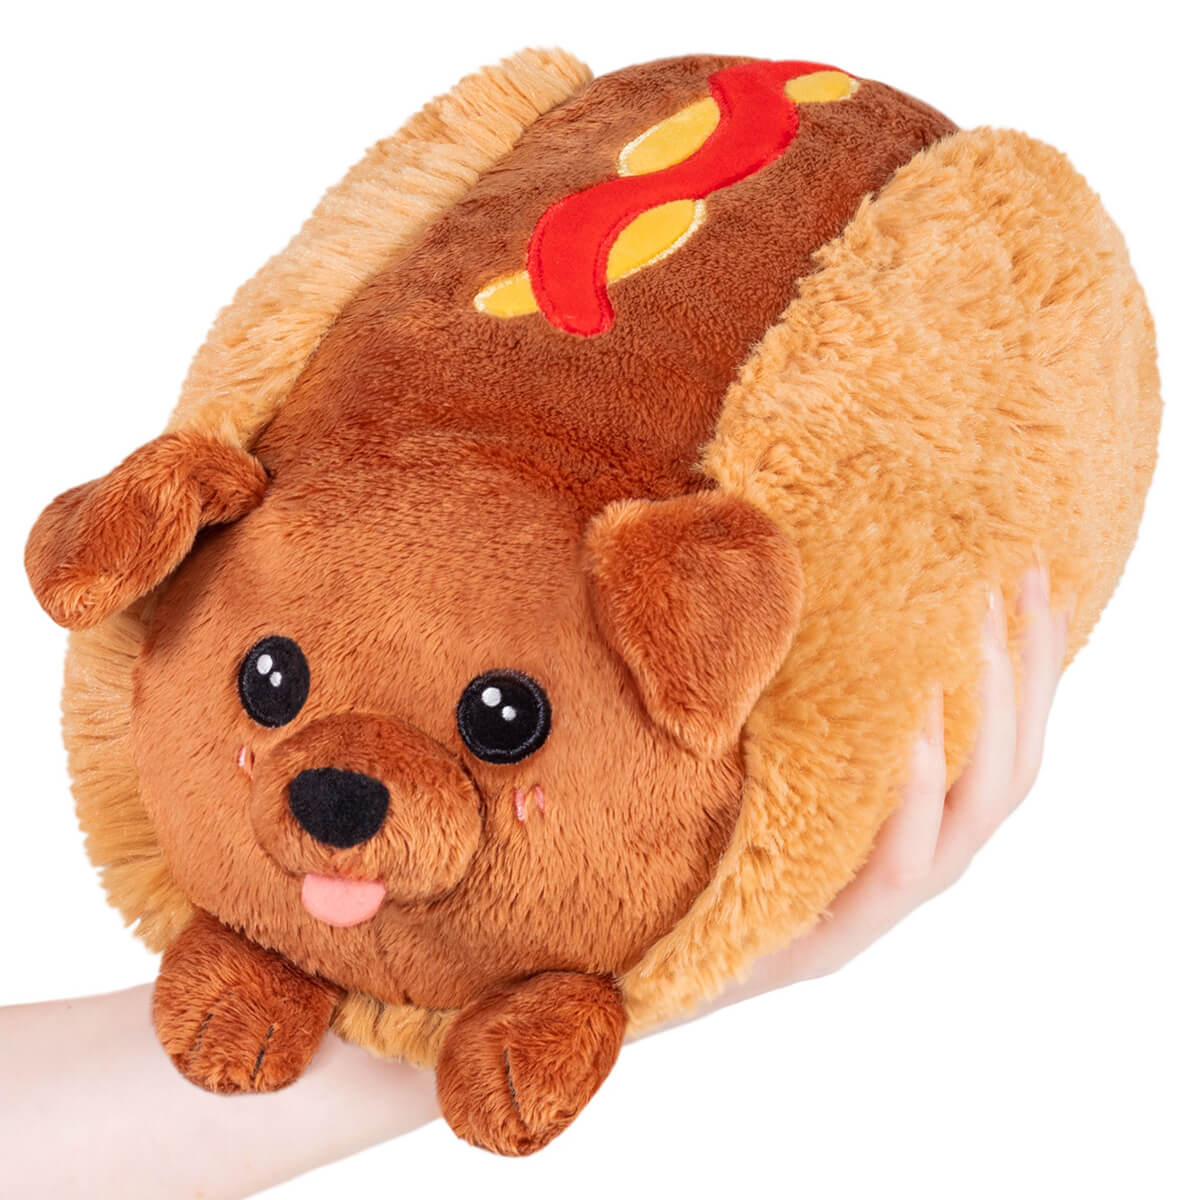 Snugglemi Snackers Dachshund Hot Dog Plush from Squishables sits in a plush role with catsup and mustard.